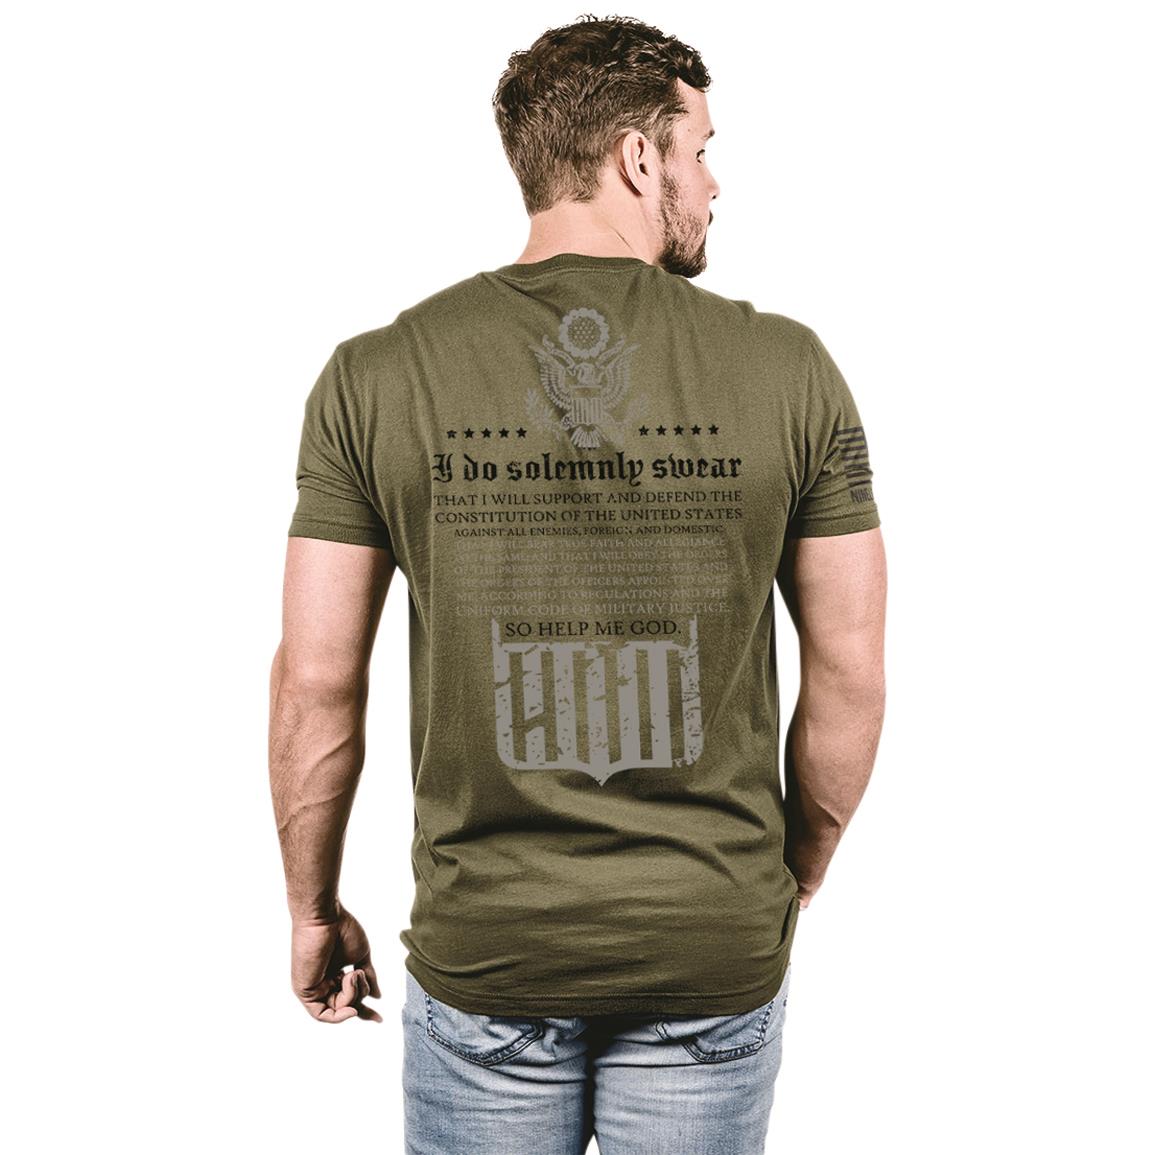 Screen-printed graphic on back, Military Green